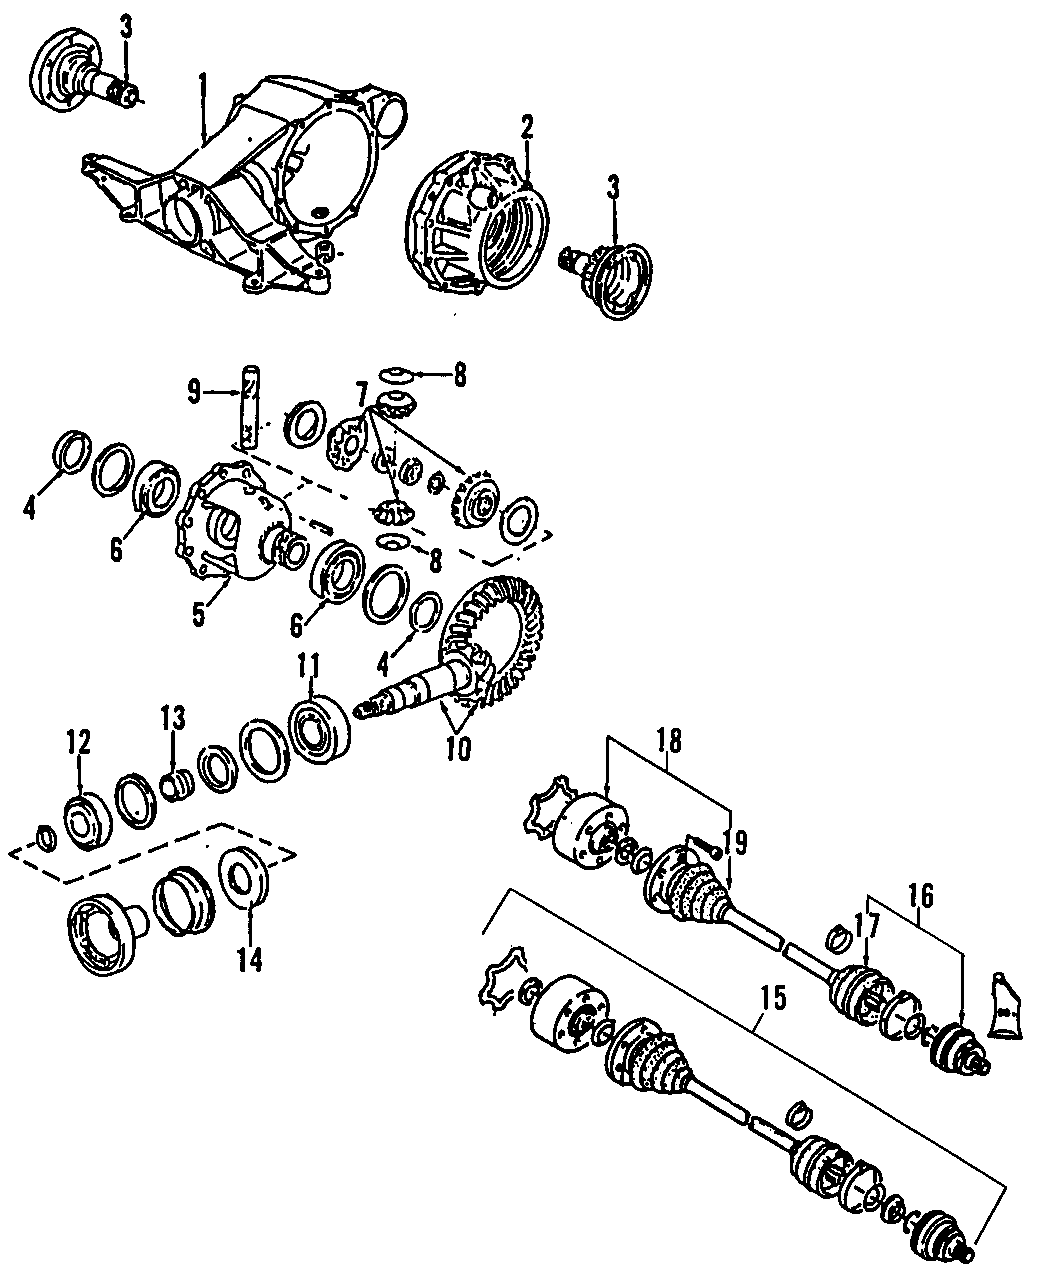 3DRIVE AXLES. REAR AXLE. AXLE SHAFTS & JOINTS. DIFFERENTIAL. PROPELLER SHAFT.https://images.simplepart.com/images/parts/motor/fullsize/F257120.png